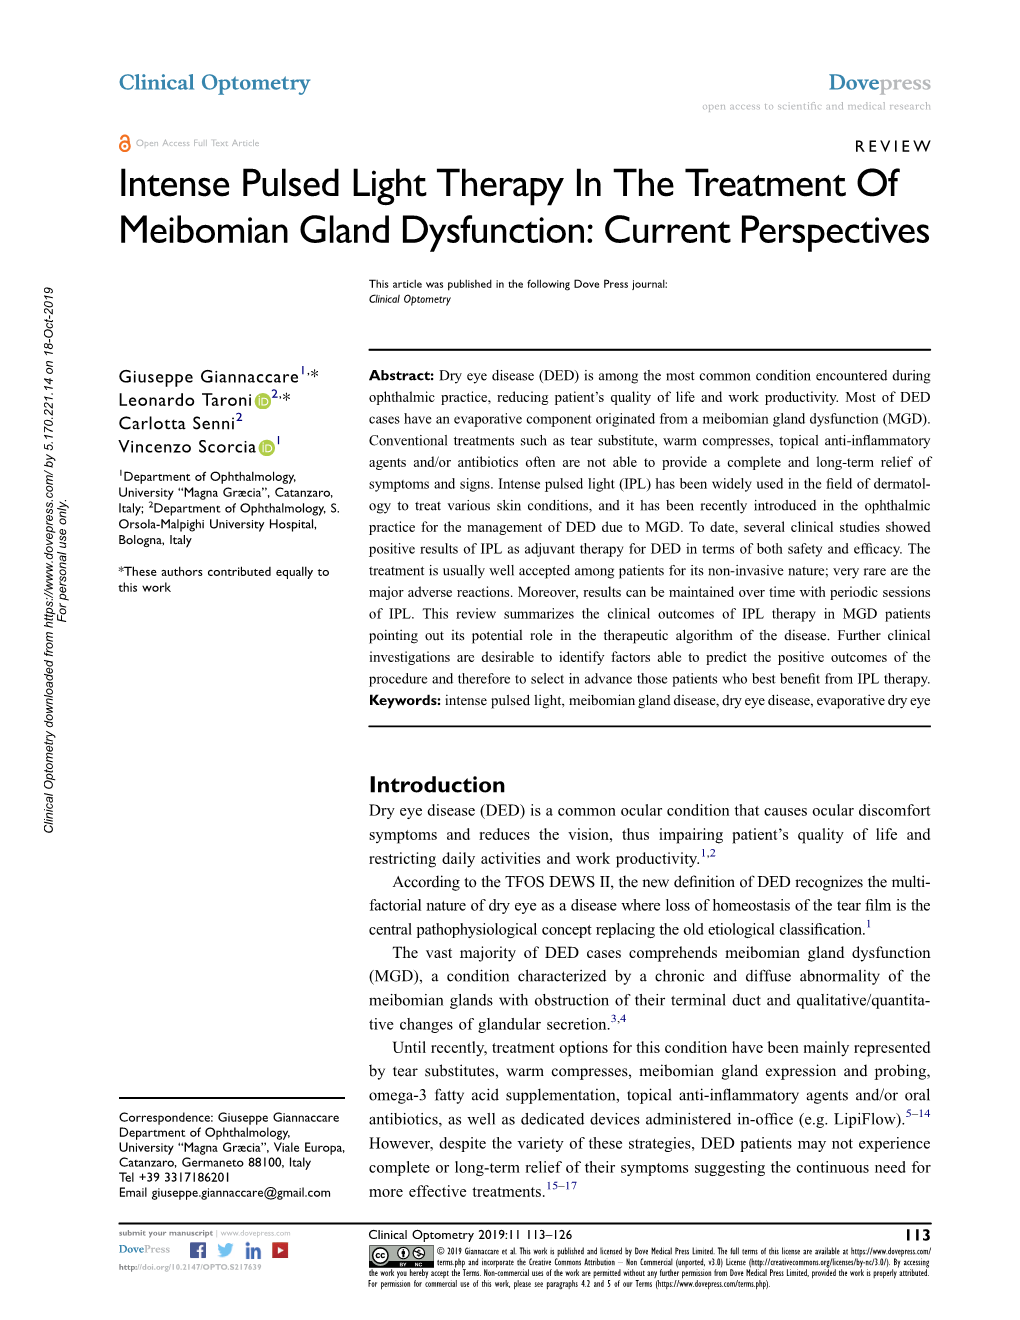 Intense Pulsed Light Therapy In The Treatment Of Meibomian Gland